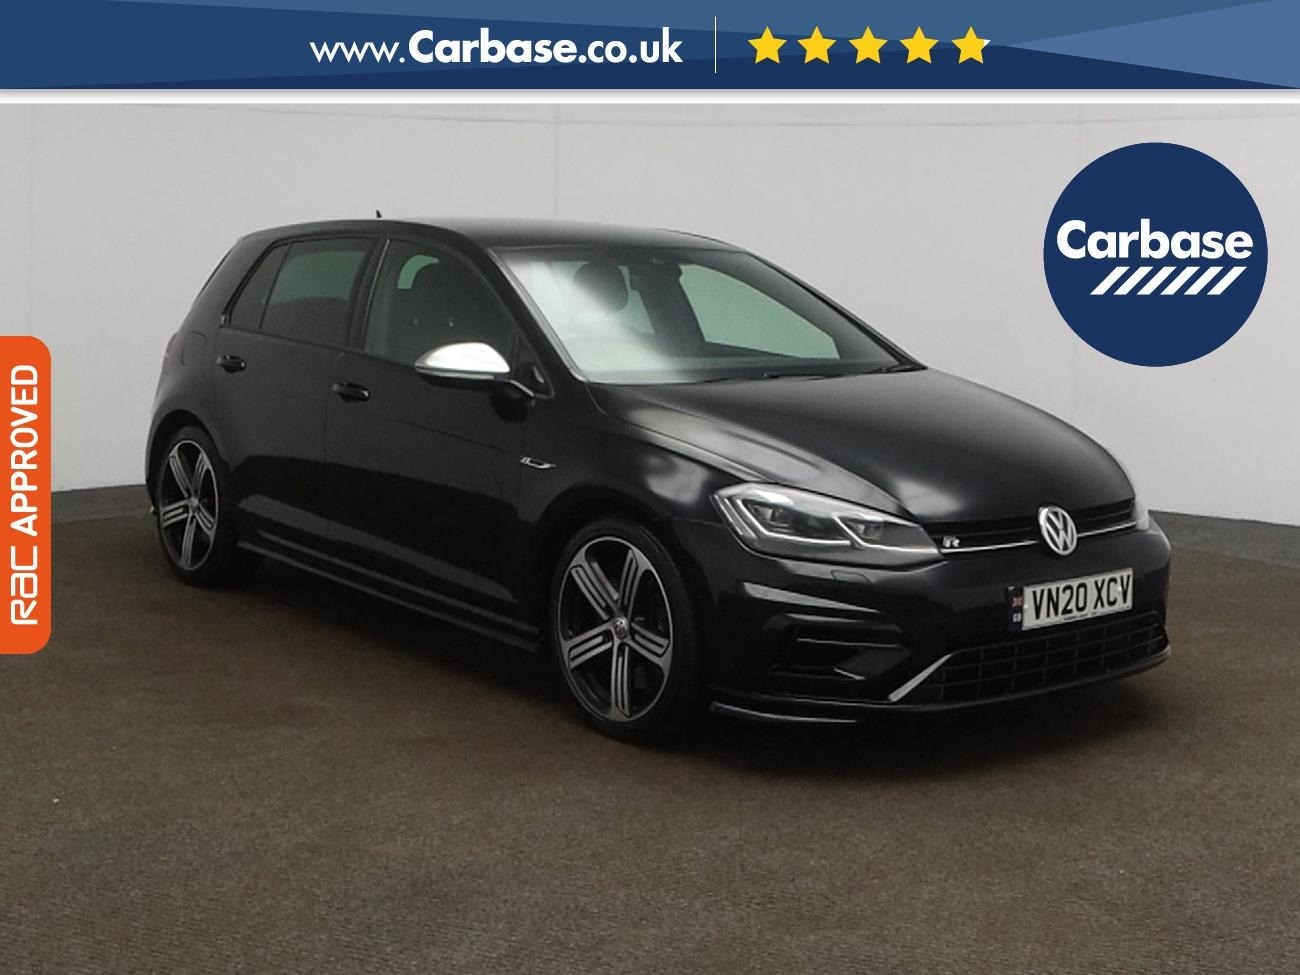 Used Volkswagen Golf for Sale Bristol. PCP Finance Deals and Offers -  Carbase